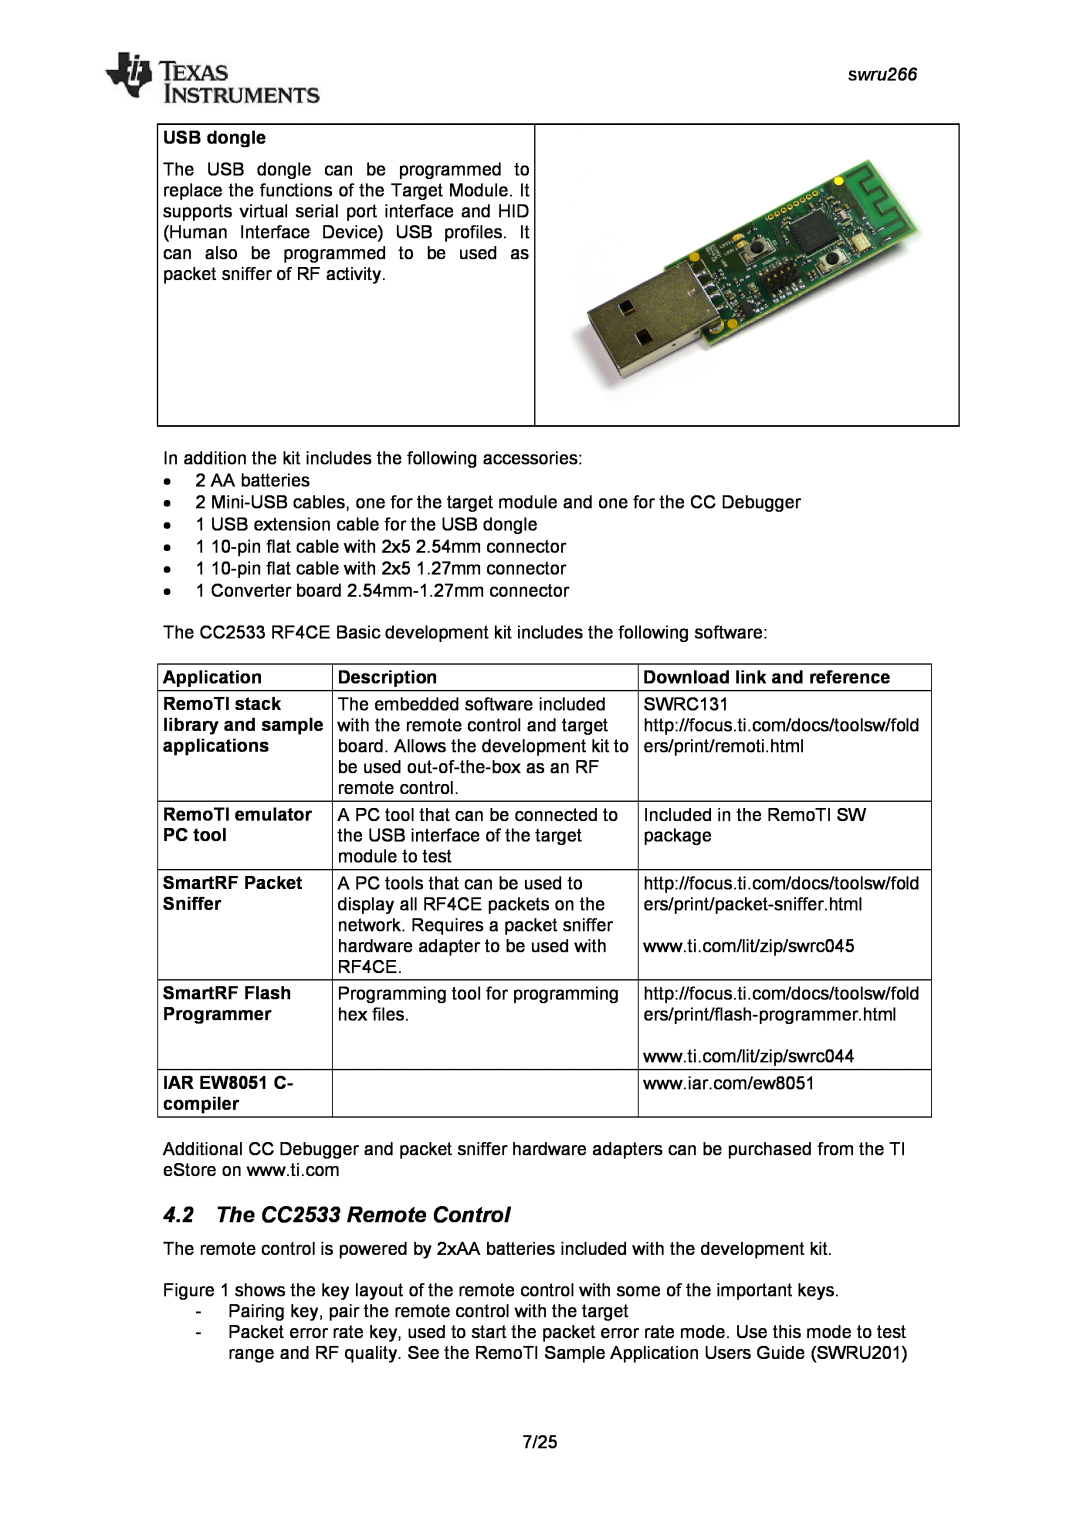 Texas Instruments manual 4.2The CC2533 Remote Control, USB dongle, Application, Description, Download link and reference 